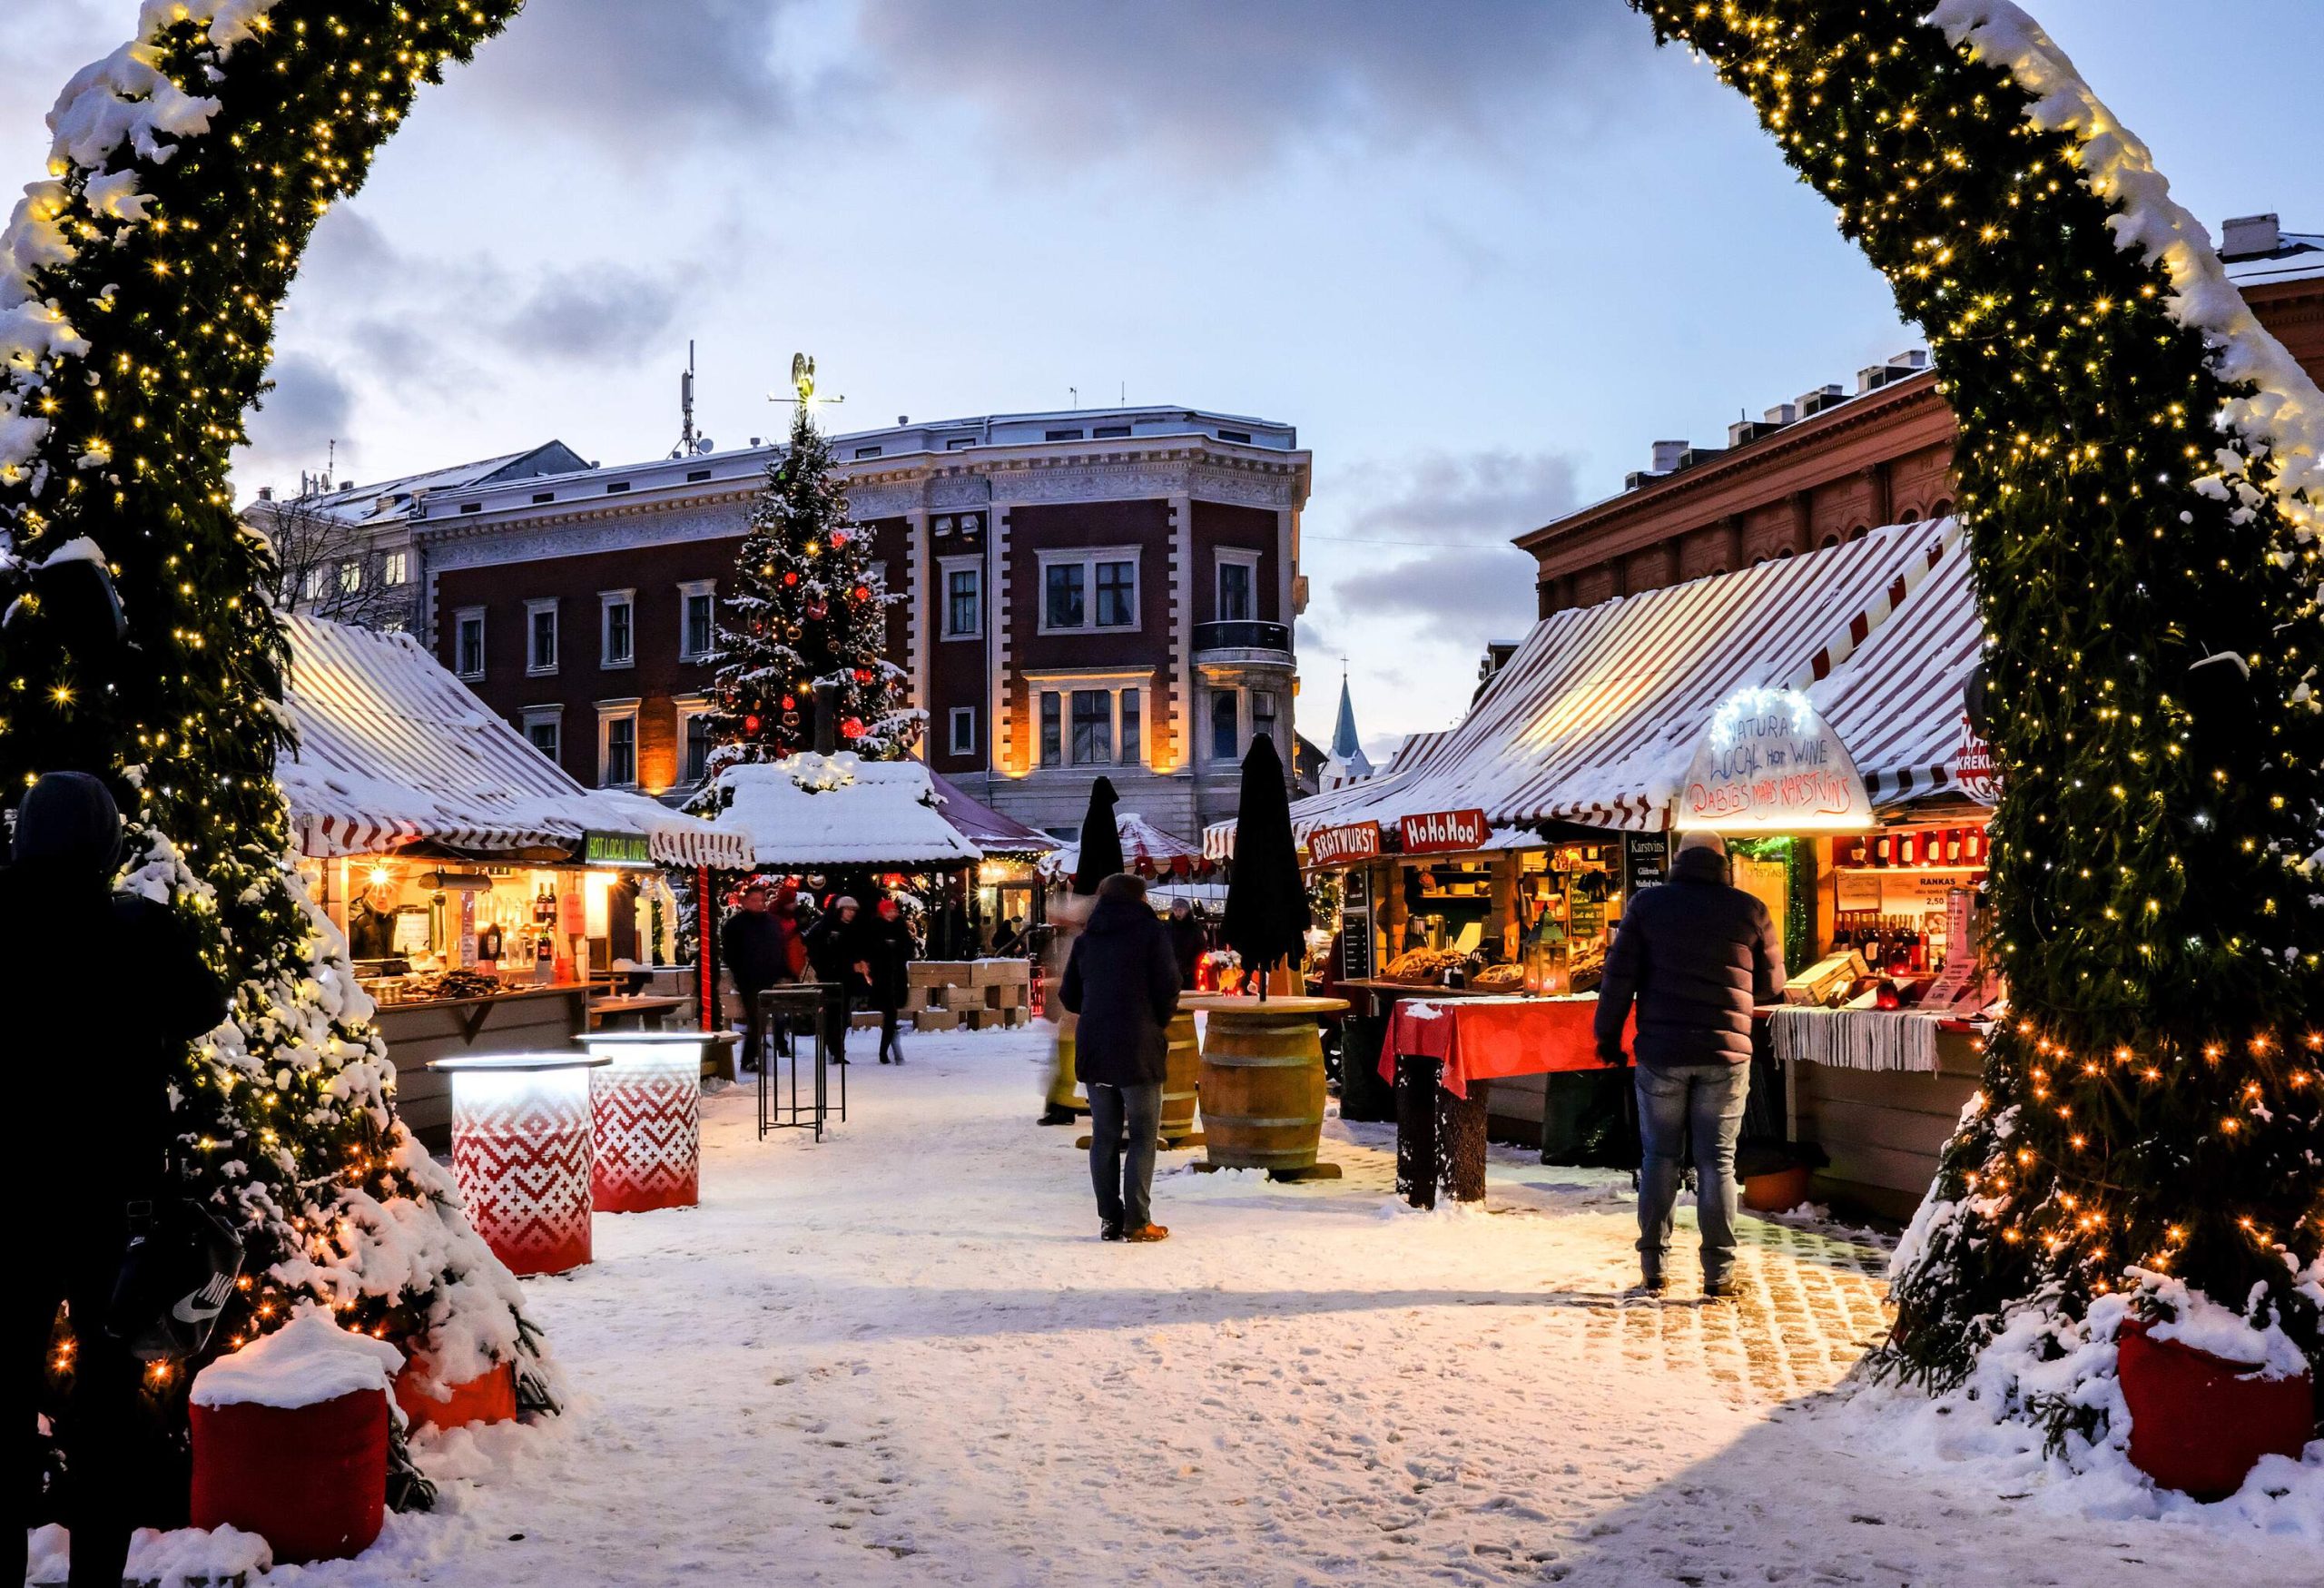 An entrance archway to a snow-covered Christmas market decorated with lights and garlands.